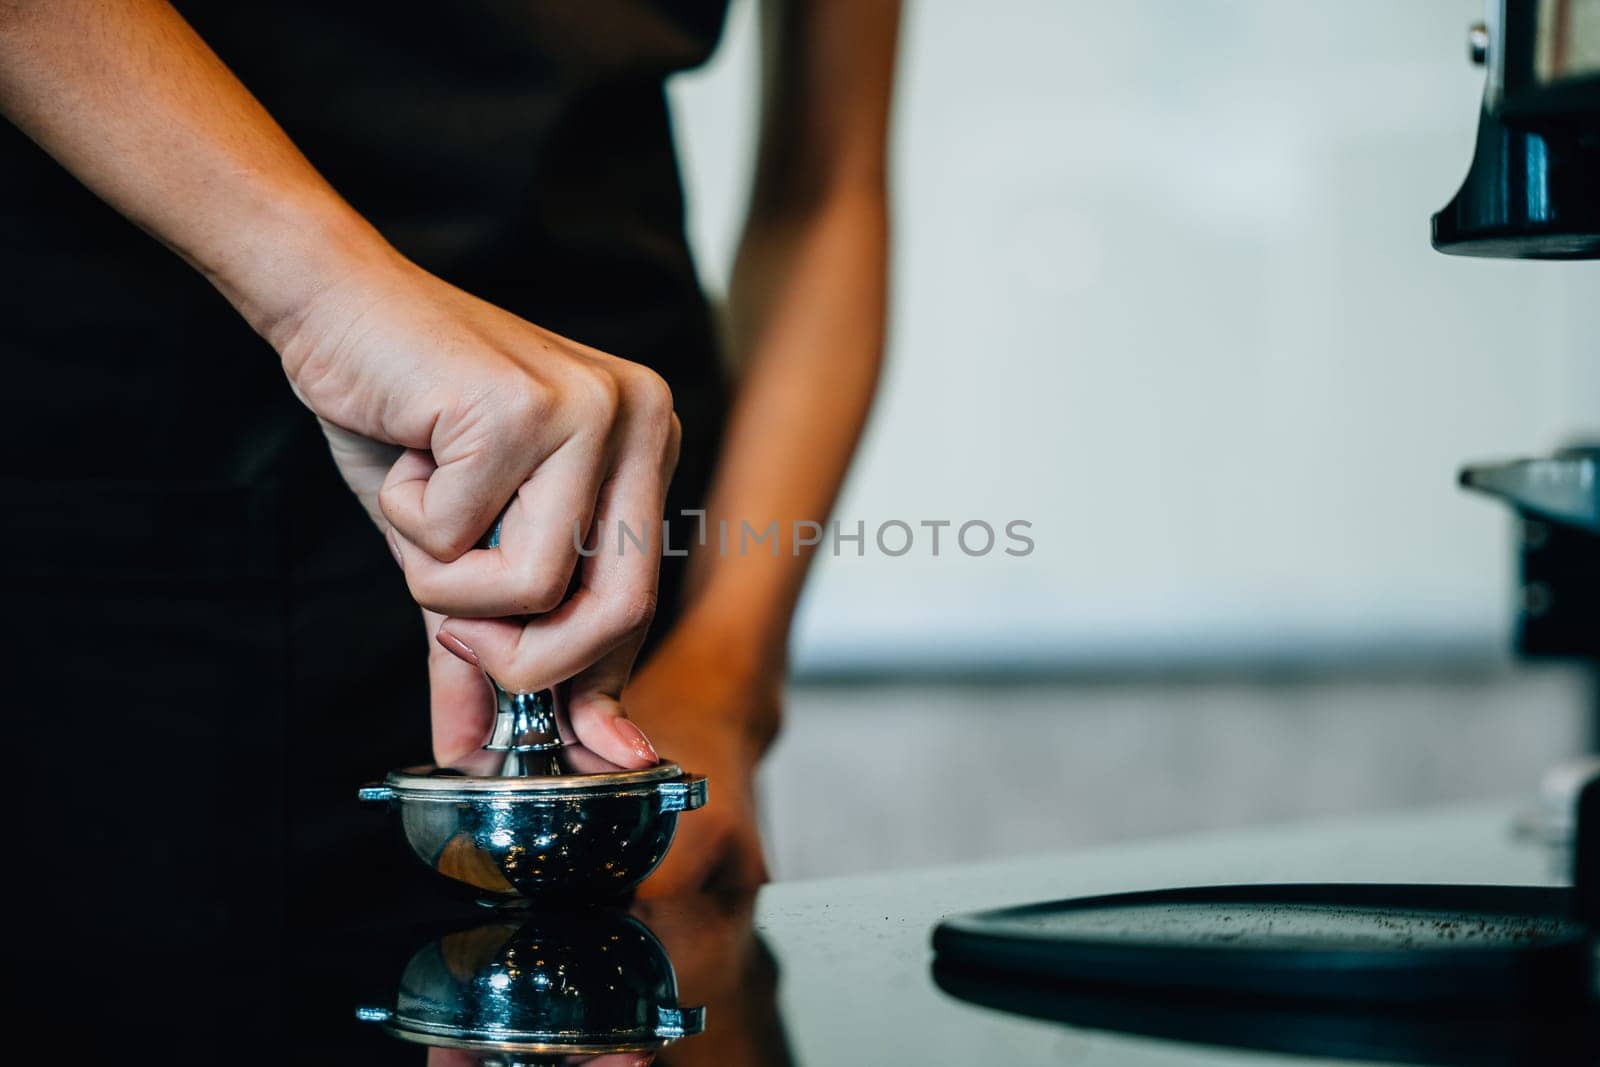 At restaurant or pub coffee machine brews fresh tasty coffee. Step by step guide for professional coffee making. Close up of machine hand holding handle pouring delicious espresso. by Sorapop